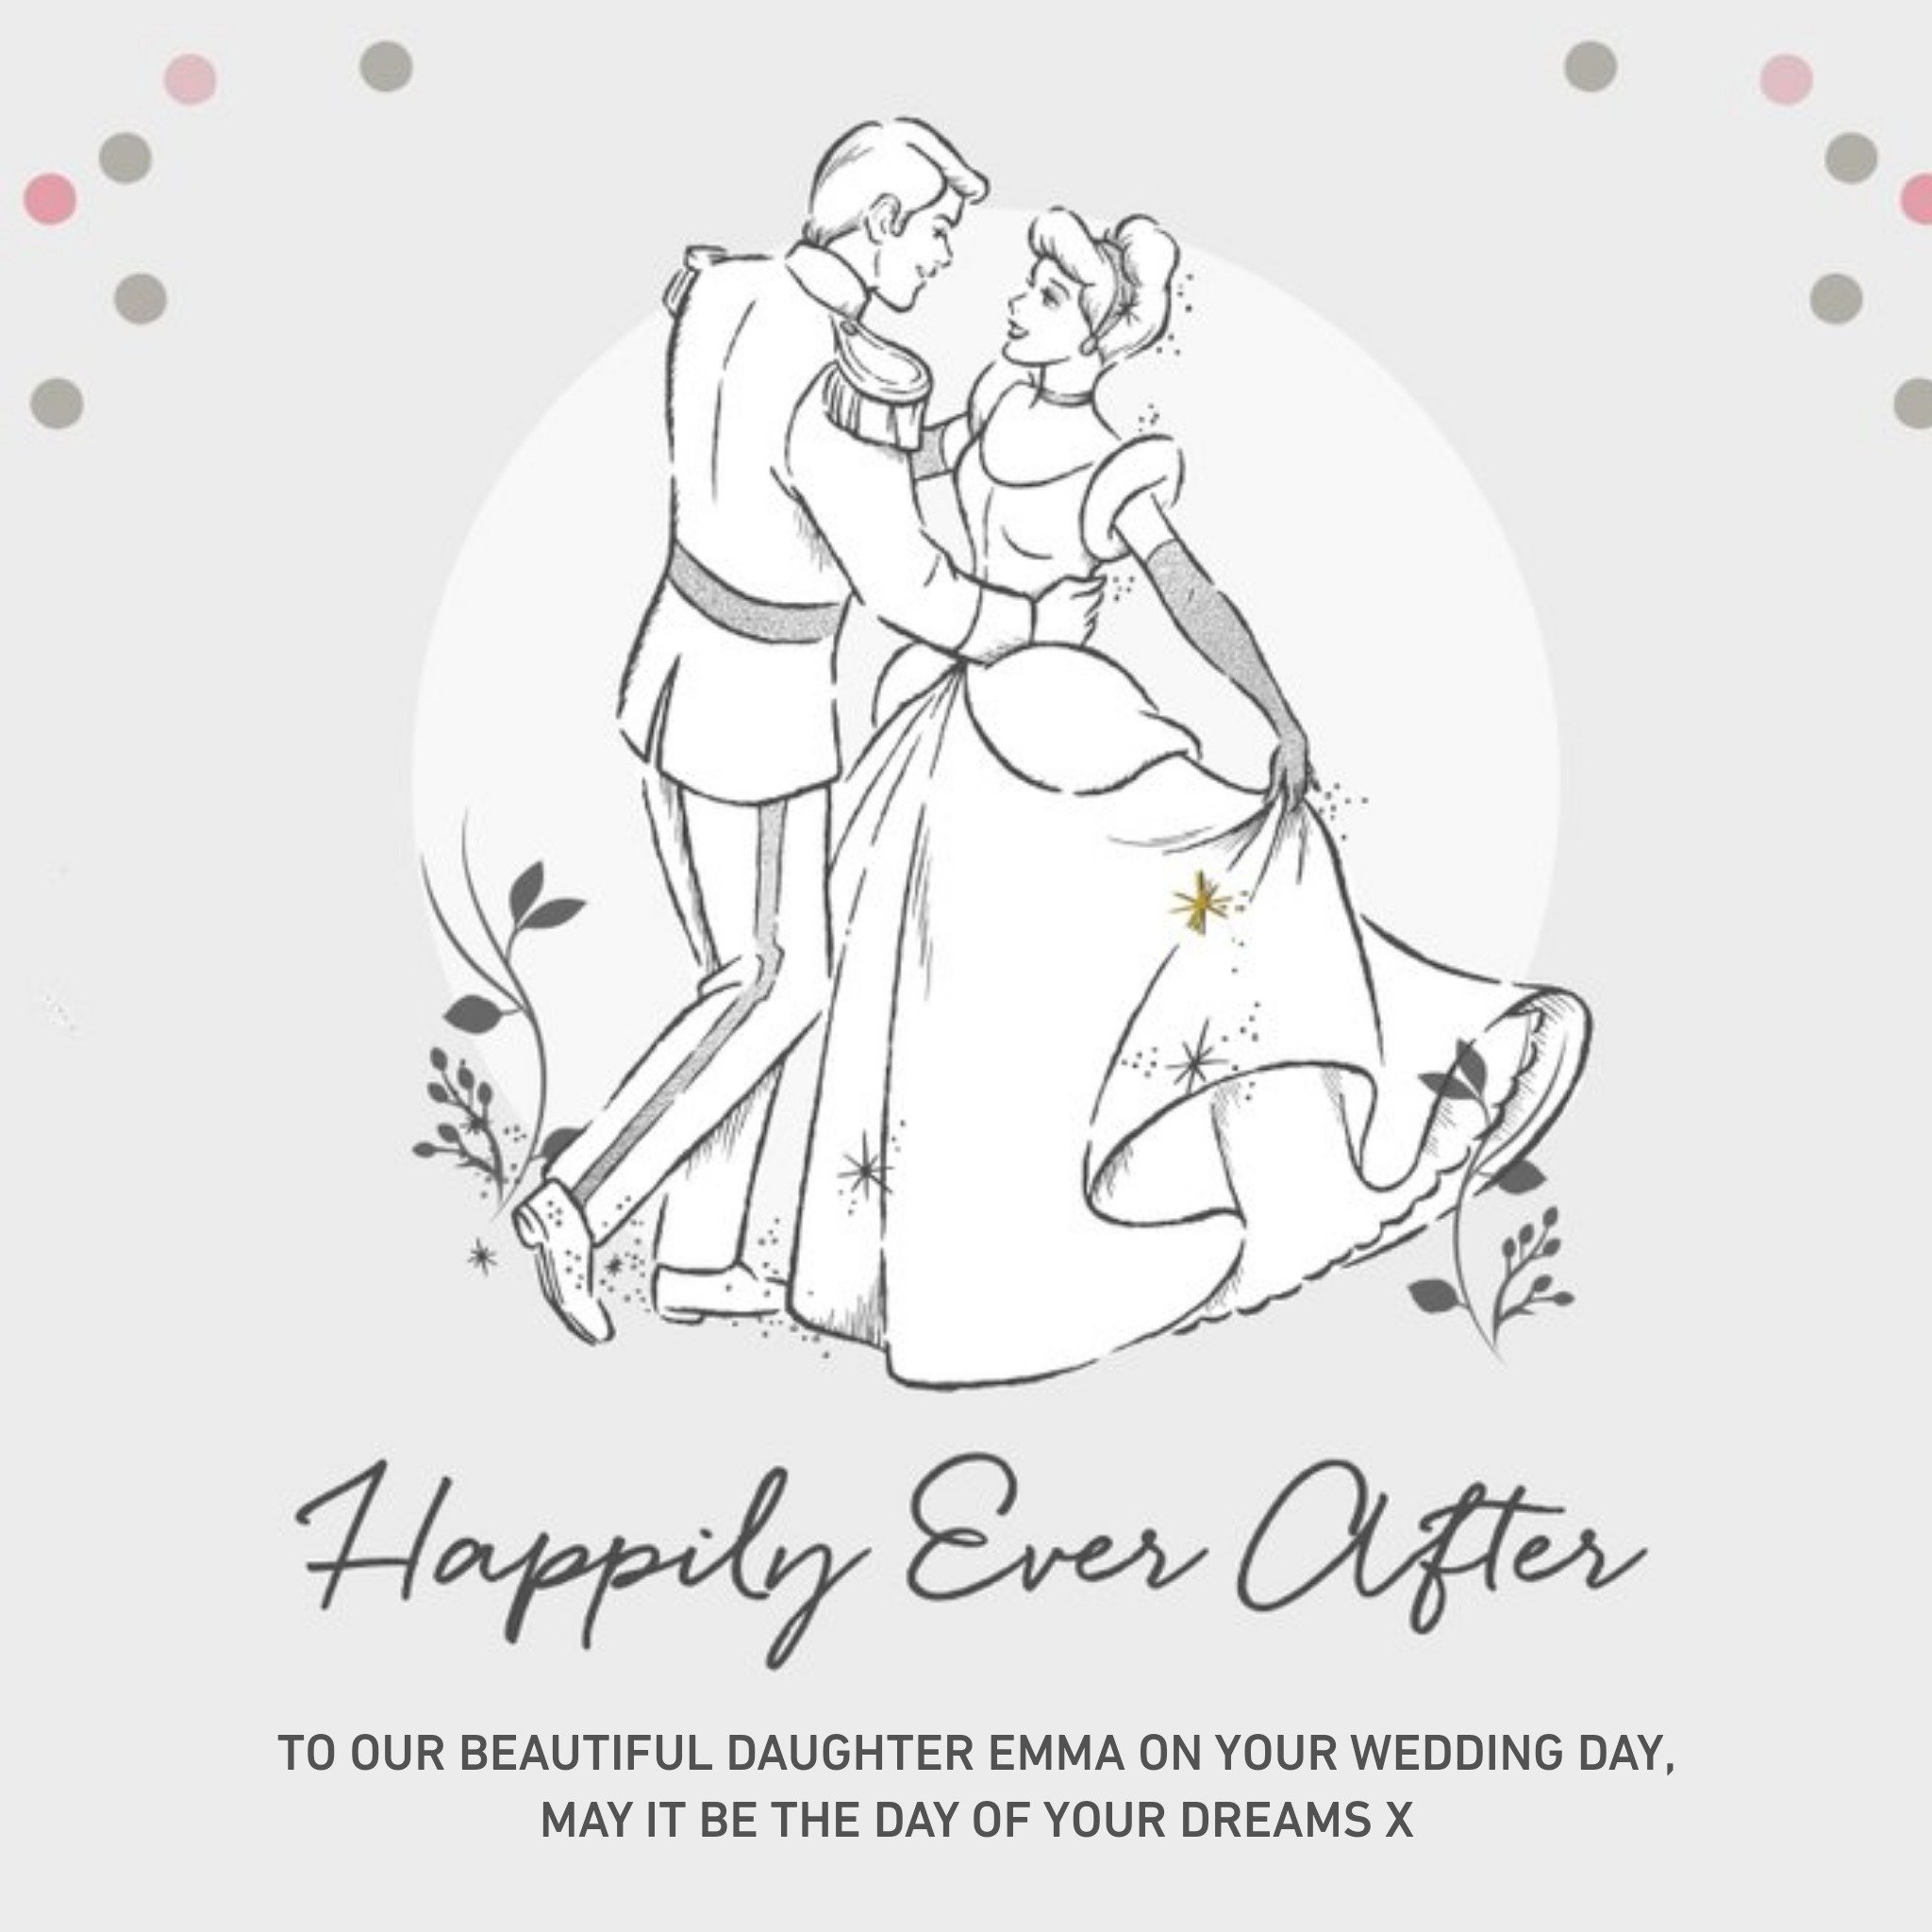 Disney Cinderella And Prince Charming Happily Ever After Wedding Card For Daughter, Square